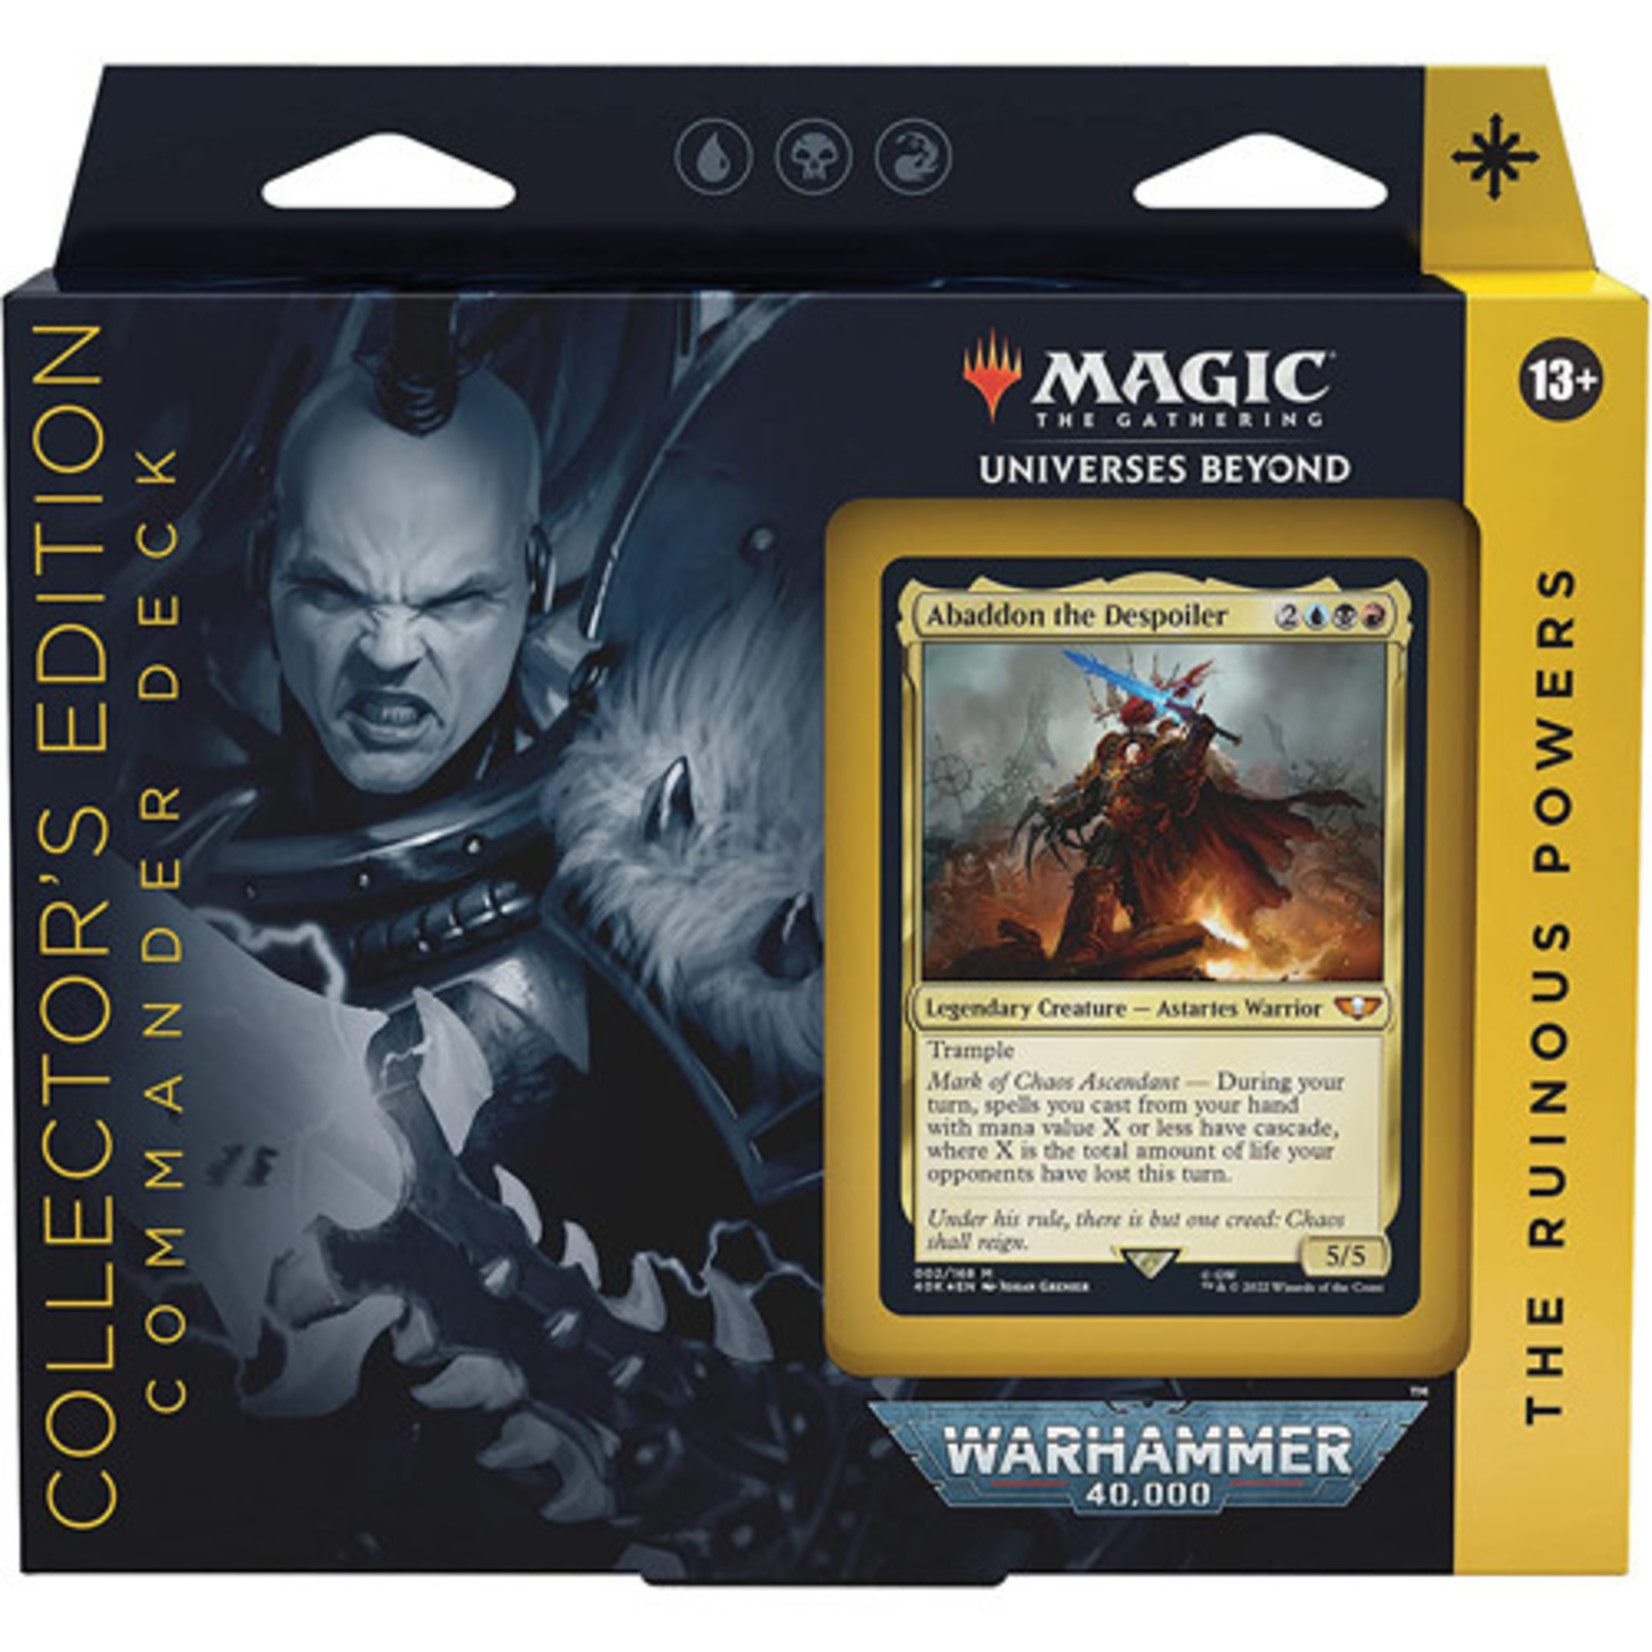 Wizards of the Coast Magic the Gathering: Warhammer 40K Commander Deck - The Ruinous Powers Collector's Edition